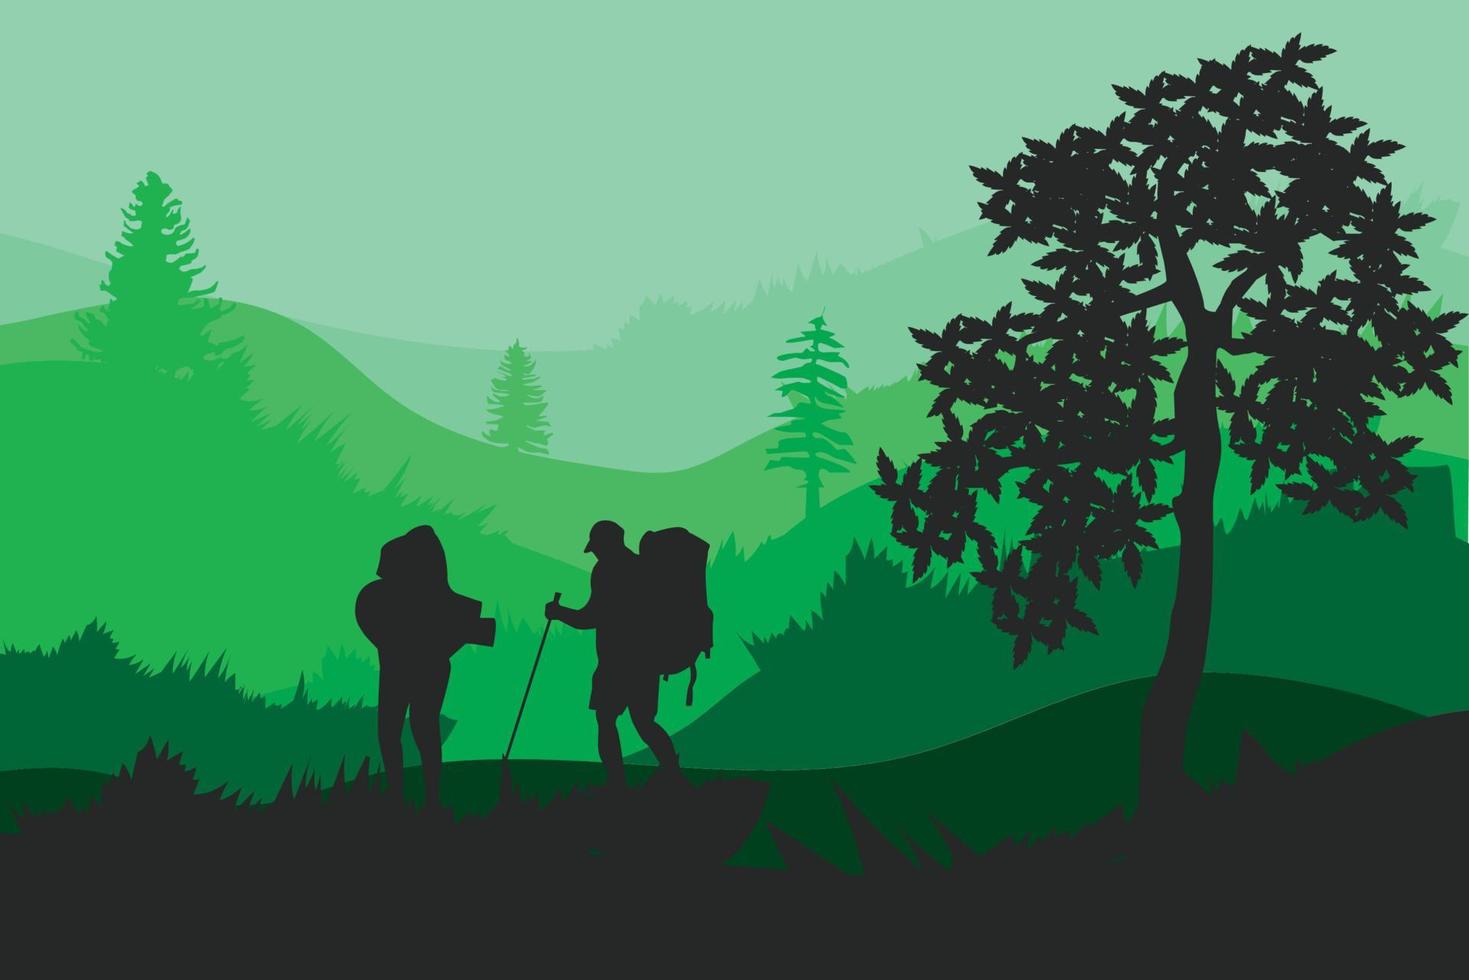 1 team hiker, backpaker, tourists standing in mountain landscape with forest under sunset sky, with clouds and flying birds, tree vector